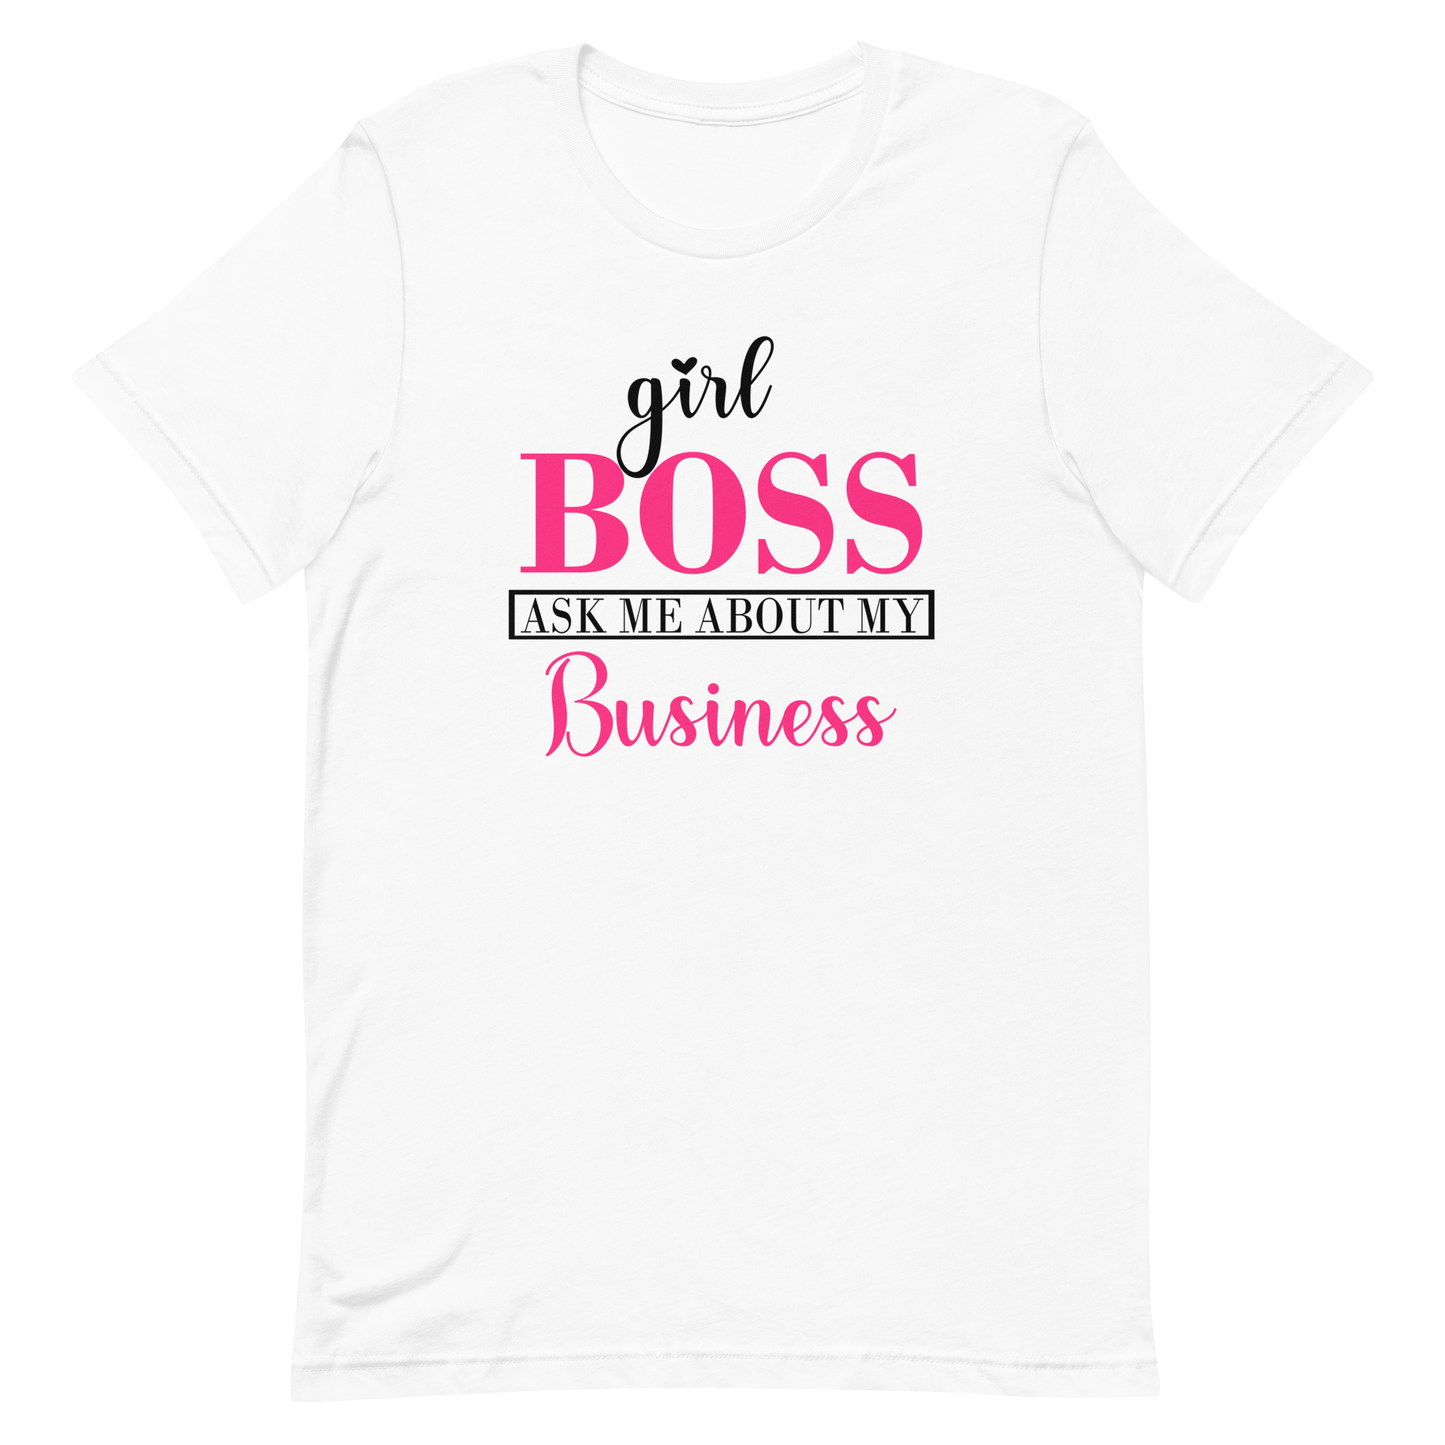 ABOUT MY BUSINESS T-SHIRT